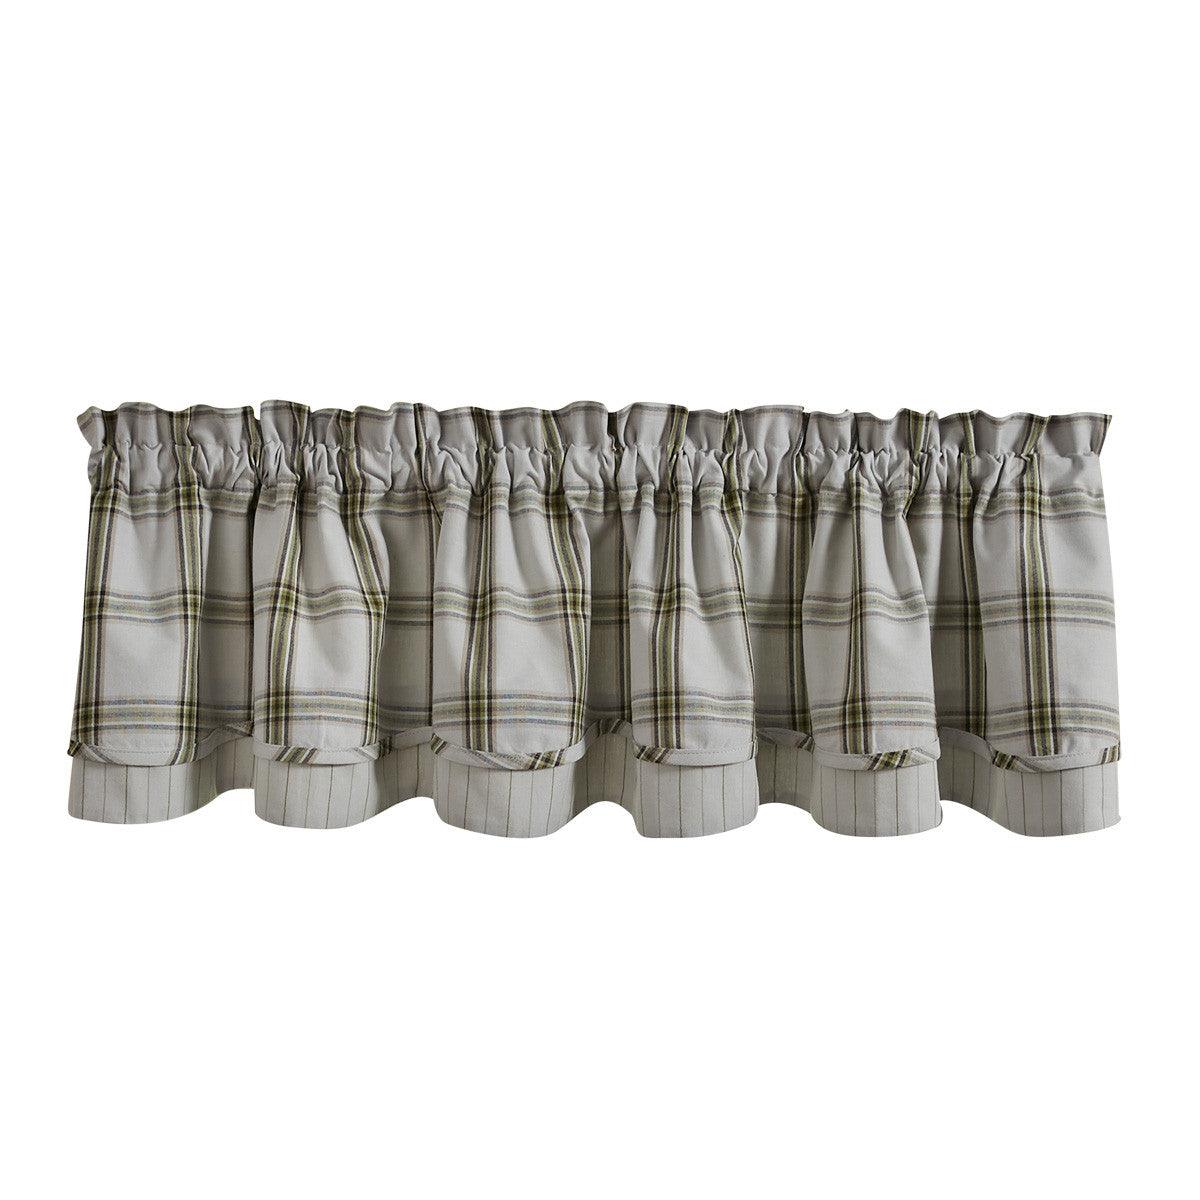 Timberline Valance - Lined Layered Park Designs - The Fox Decor